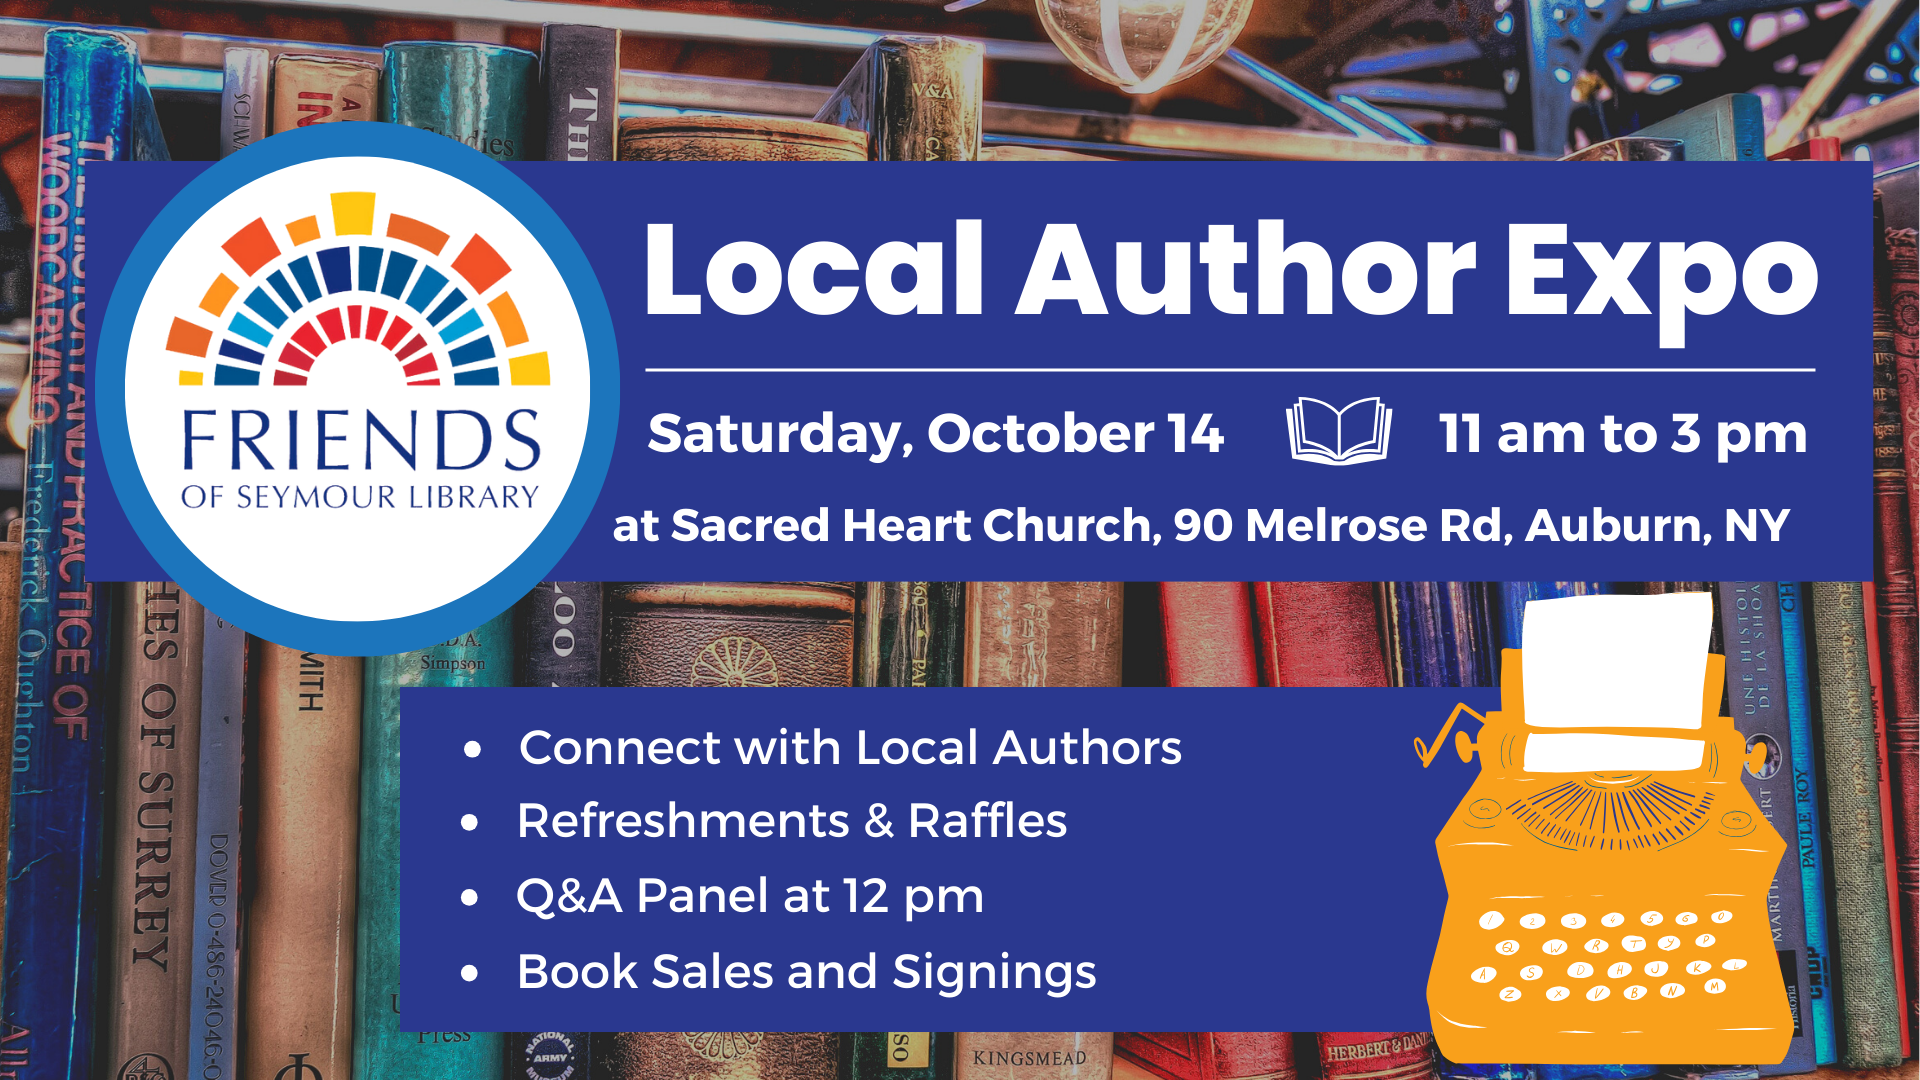 Local Author Expo - Saturday, October 14, 11 am to 3 pm - graphic with books, typewriter and Friends logo